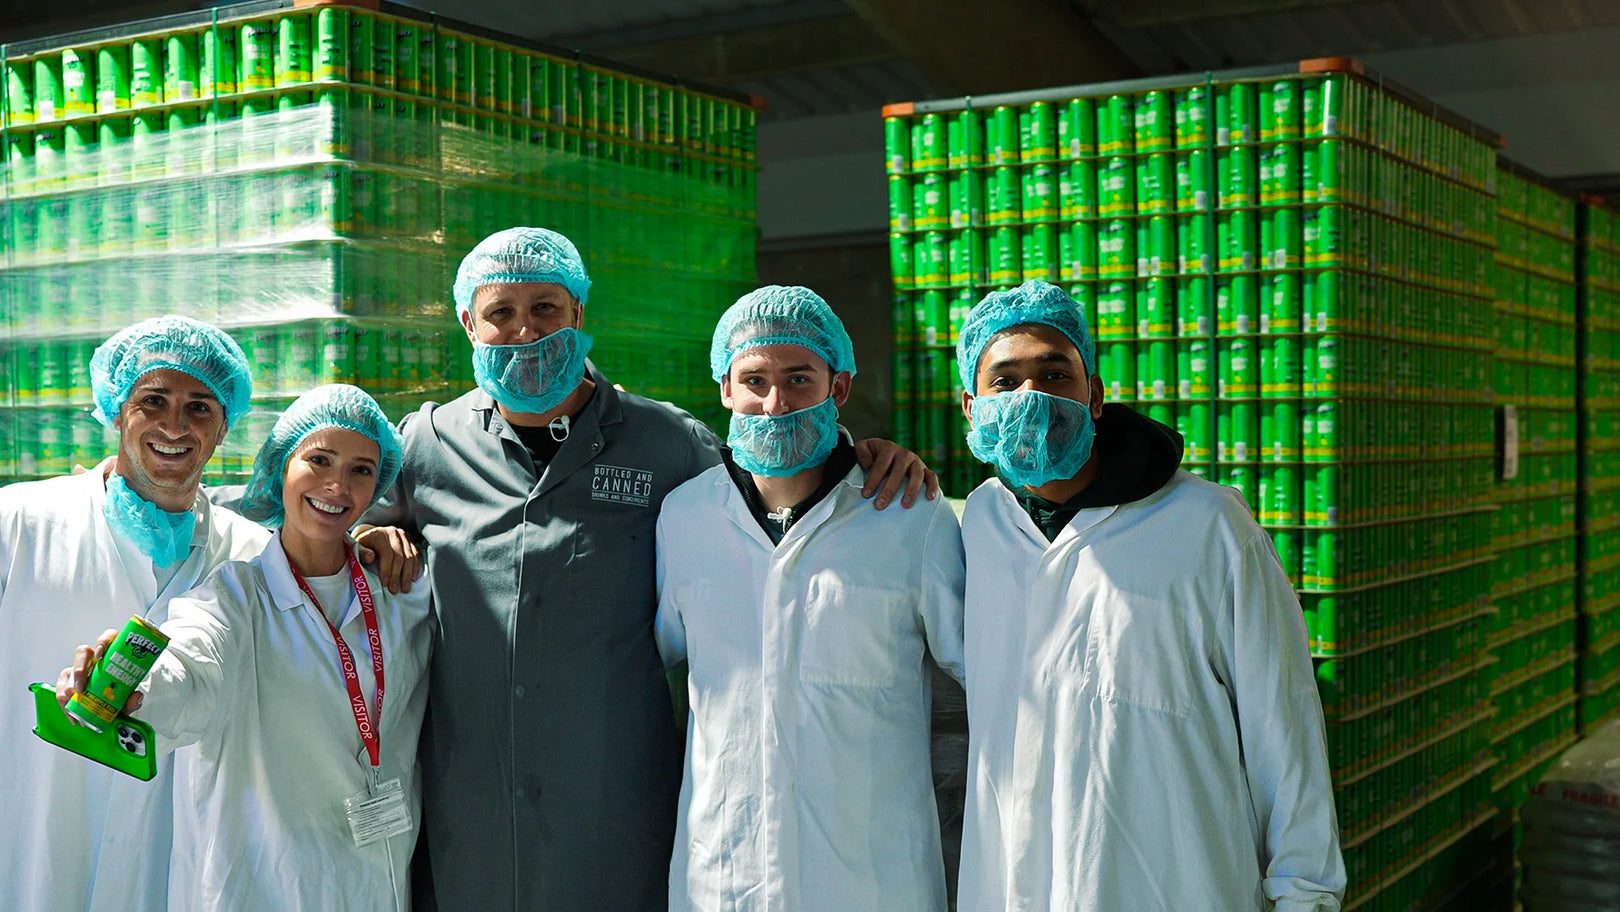 The PerfectTed Team at our energy drinks warehouse